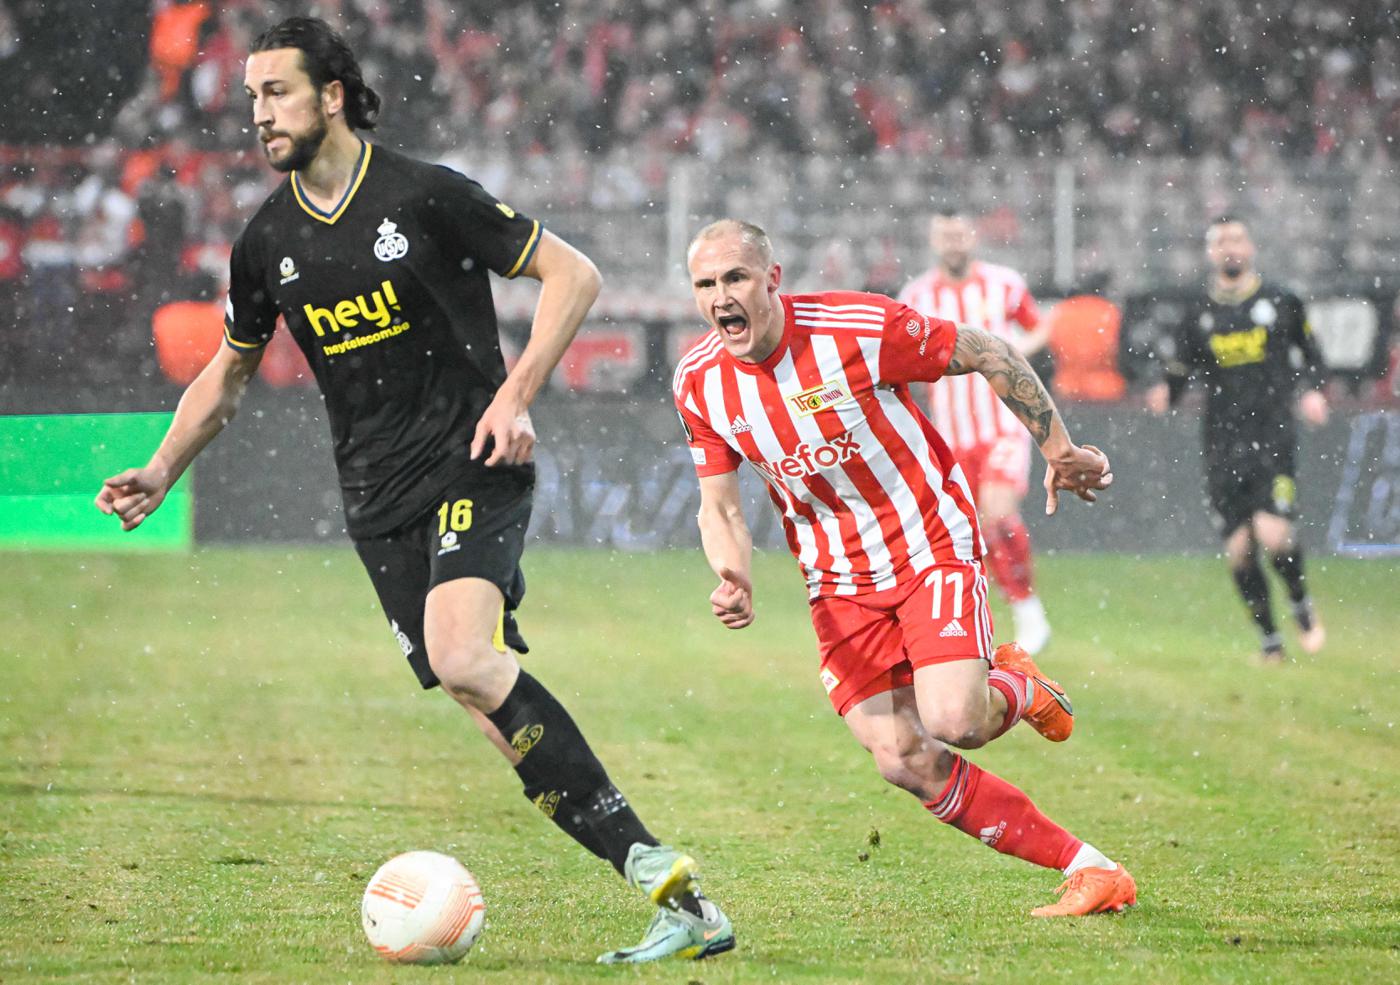 Union St. Gilloise - Union - 3:0. Europa League. Review of the match, statistics.